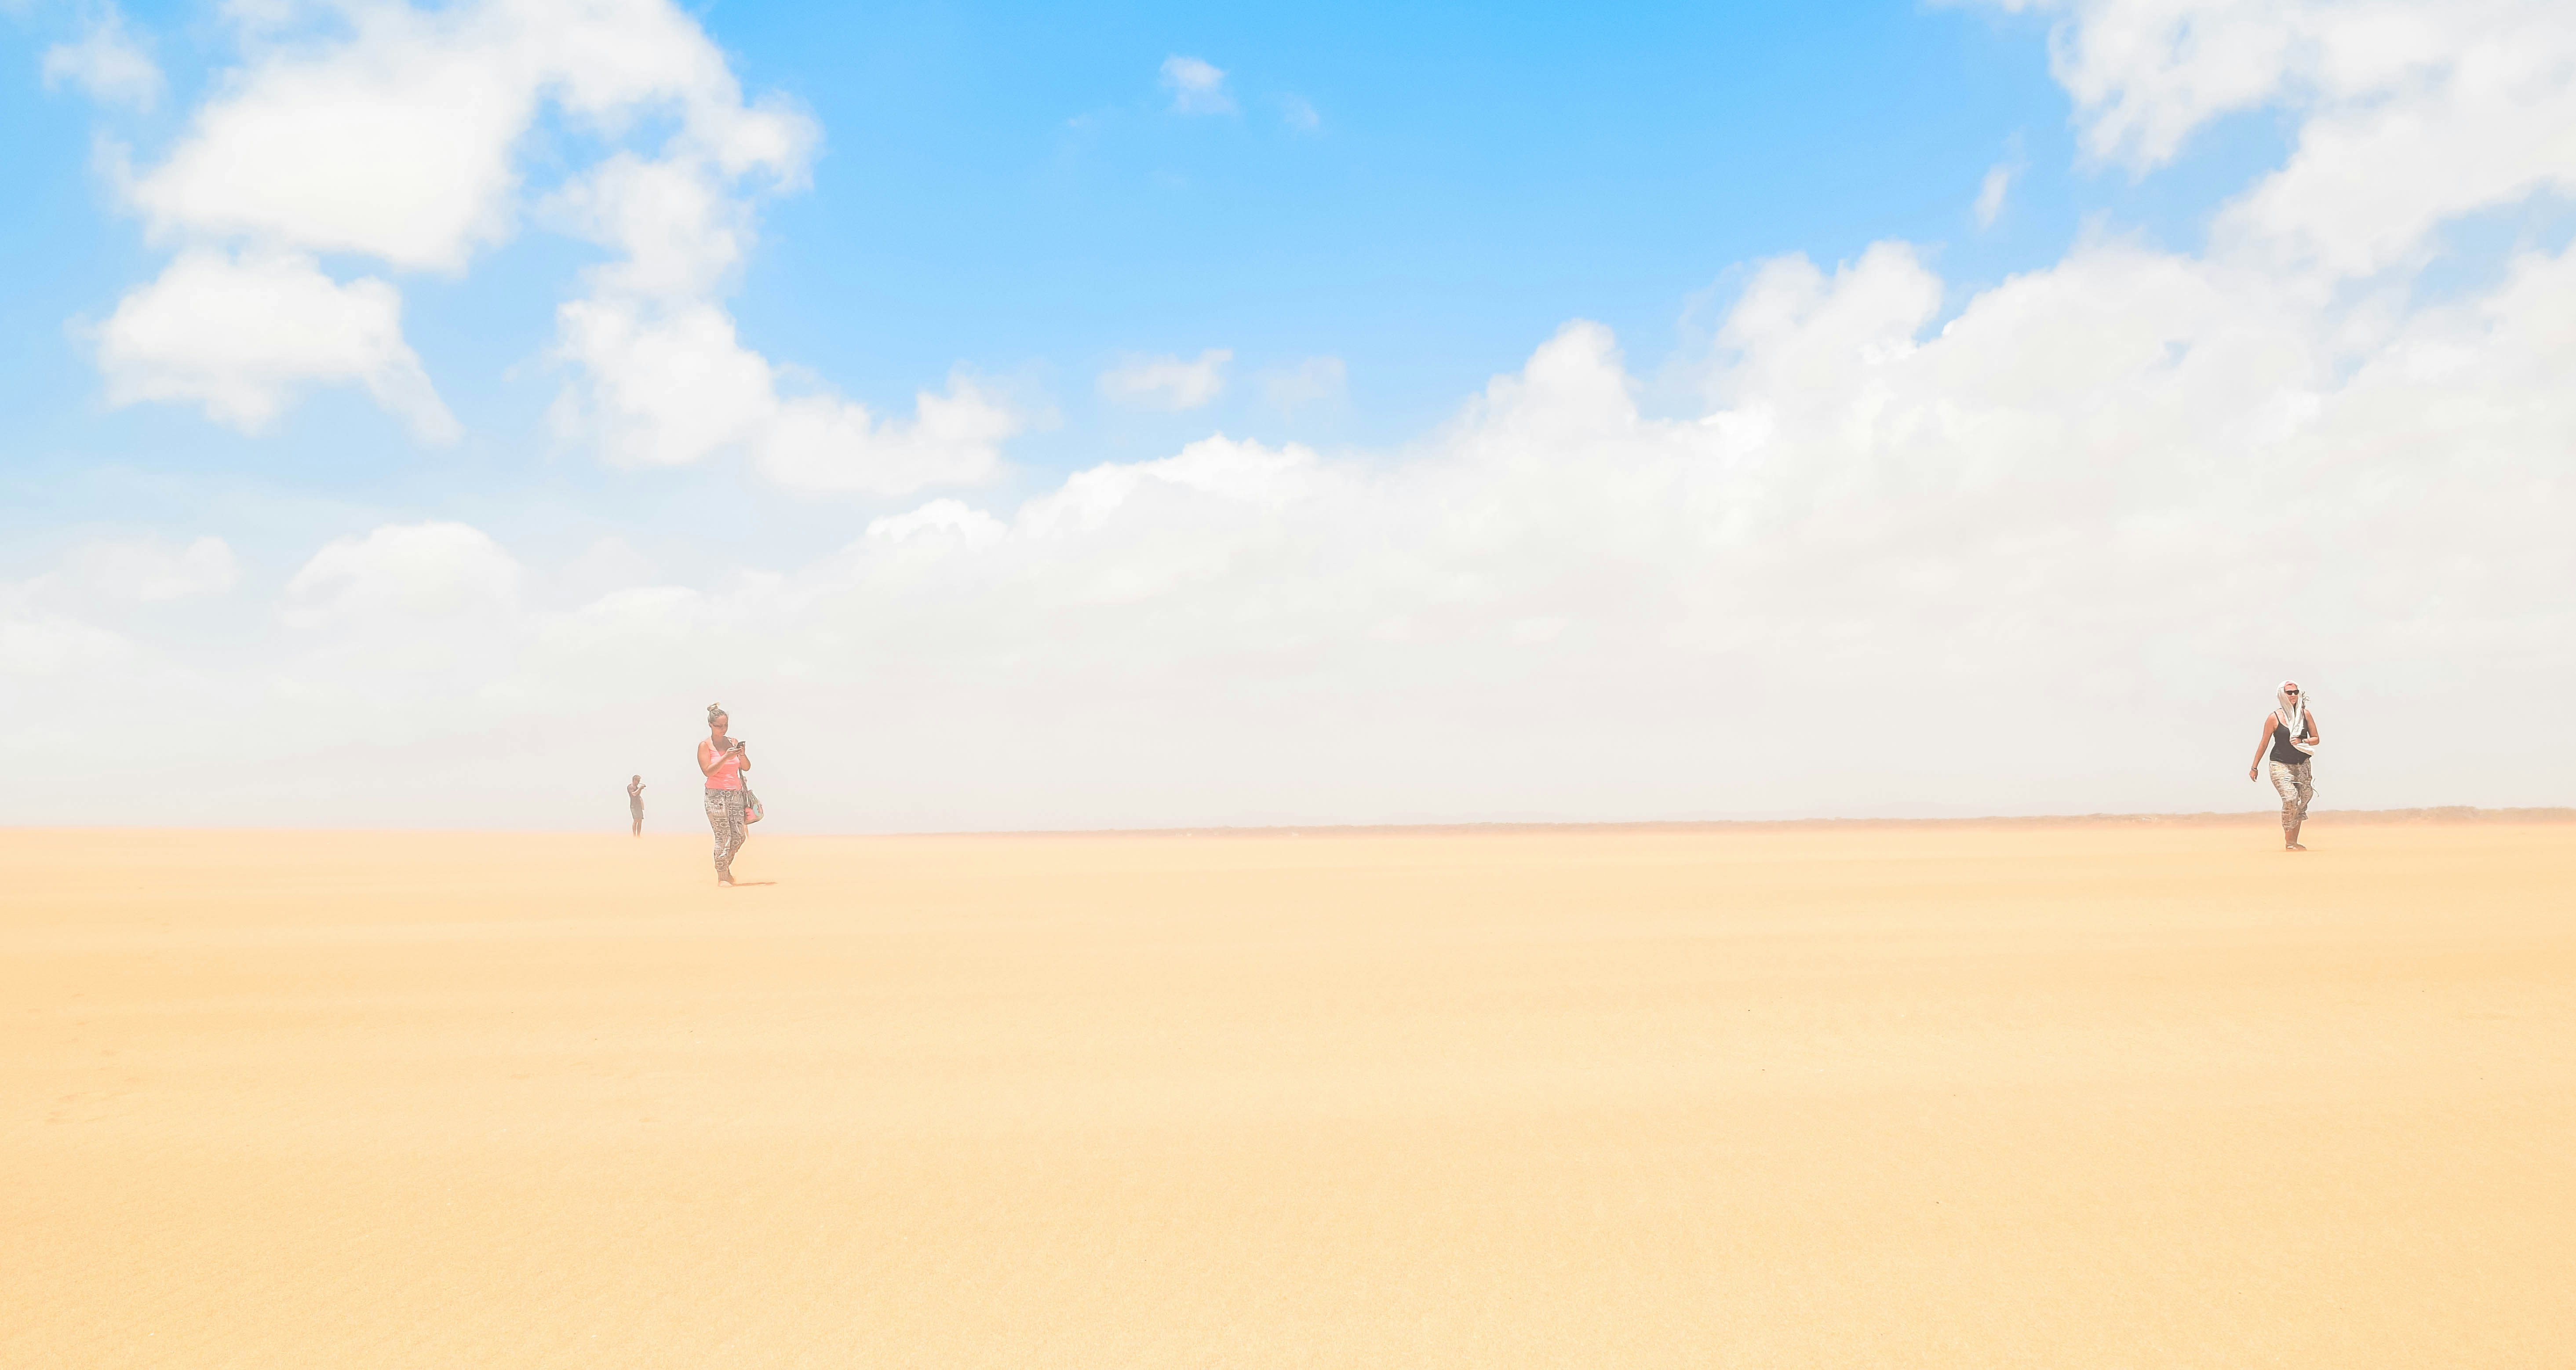 Three people, spread out across the image, walk across a vast expanse of straw-colored sand under a bright blue sky. The wind has whipped the sand in the air, and the figures are partially blurred.